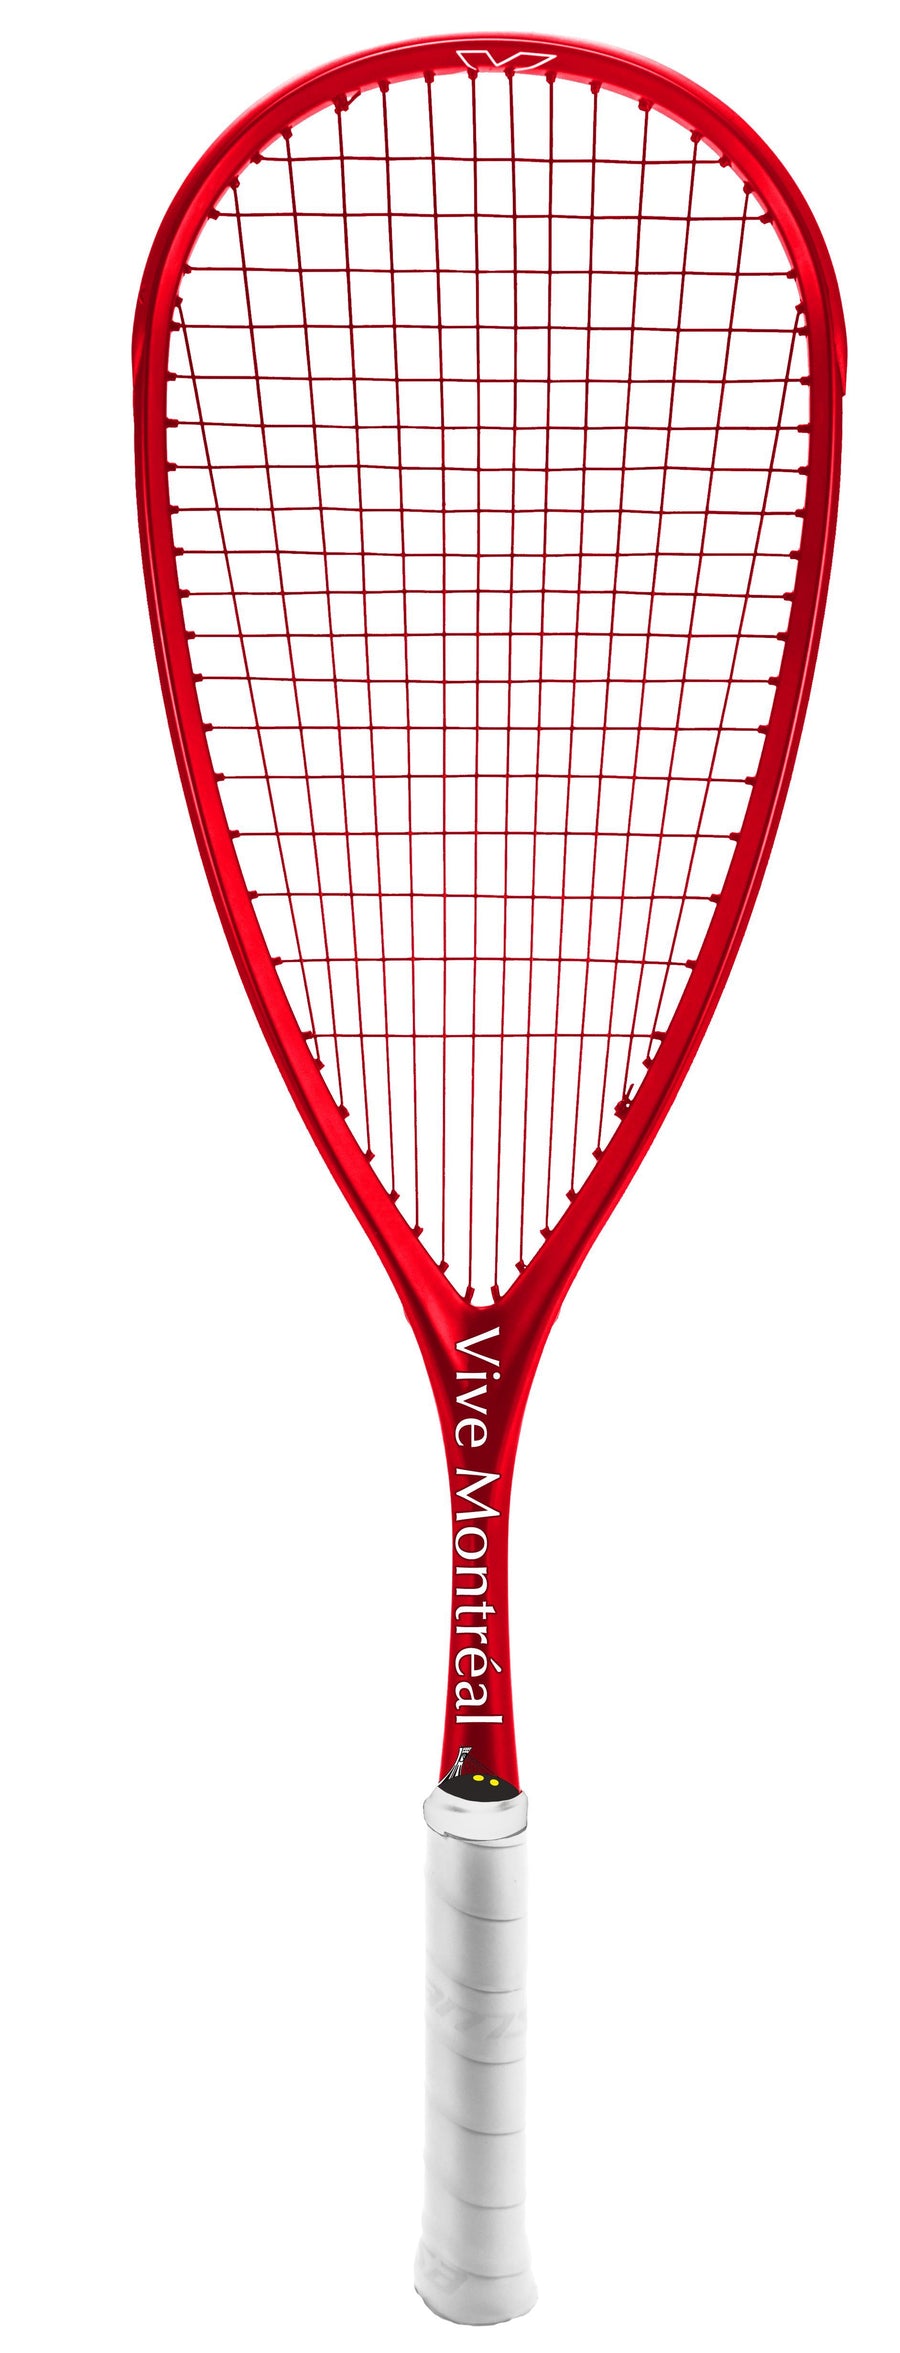 Xamsa Onyx - Vive Montreal - Limited Edition Squash Racquet with Top Bumper Squash Racquets Xamsa Strung with Xamsa PM18 Red with Canada Stencil 